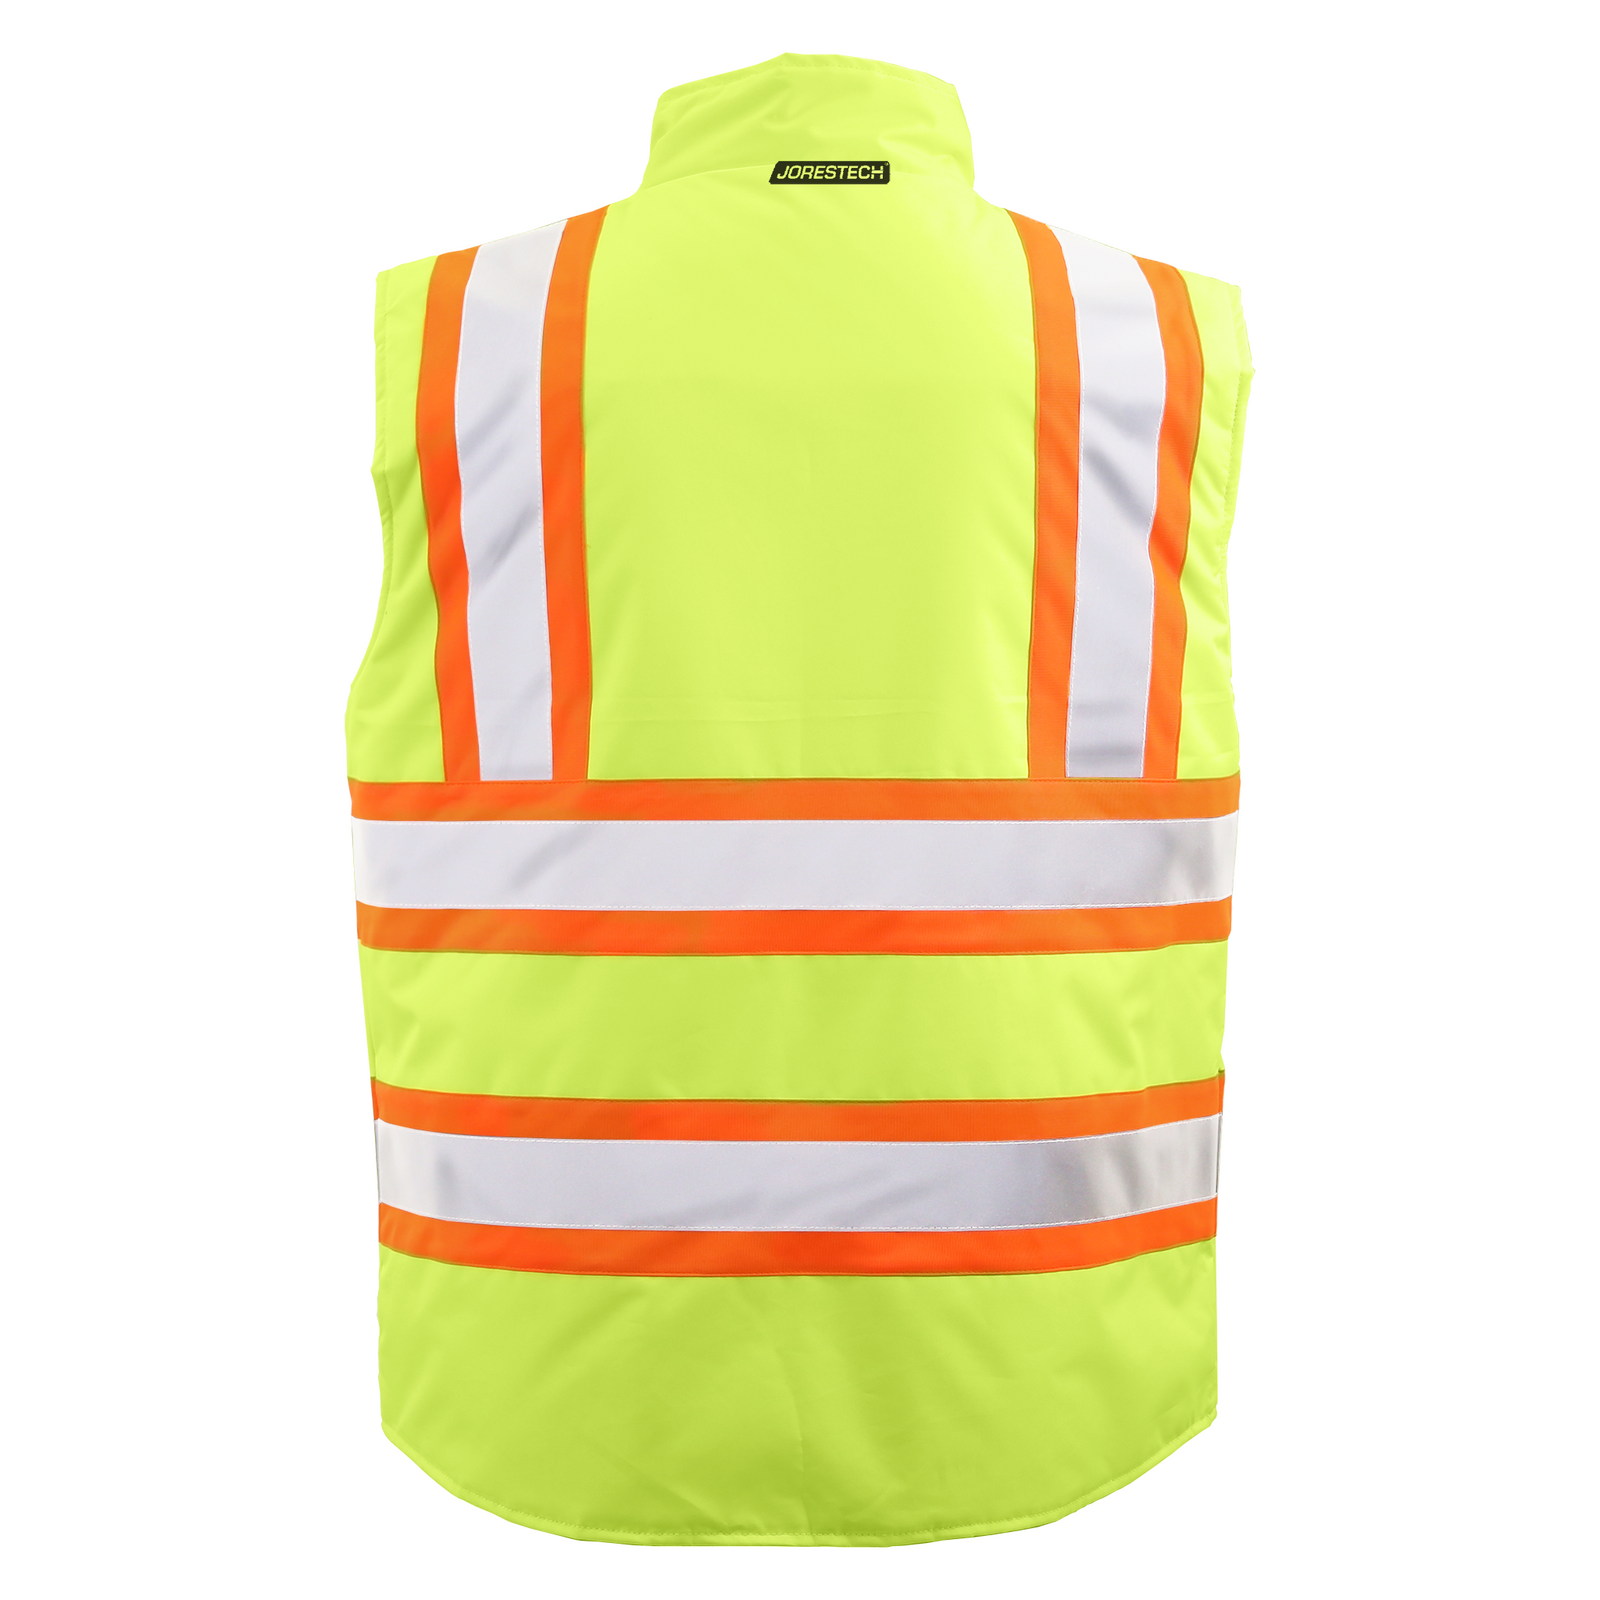 Back view of the JORESTECH® two tone yellow and orange reflective insulated safety vest